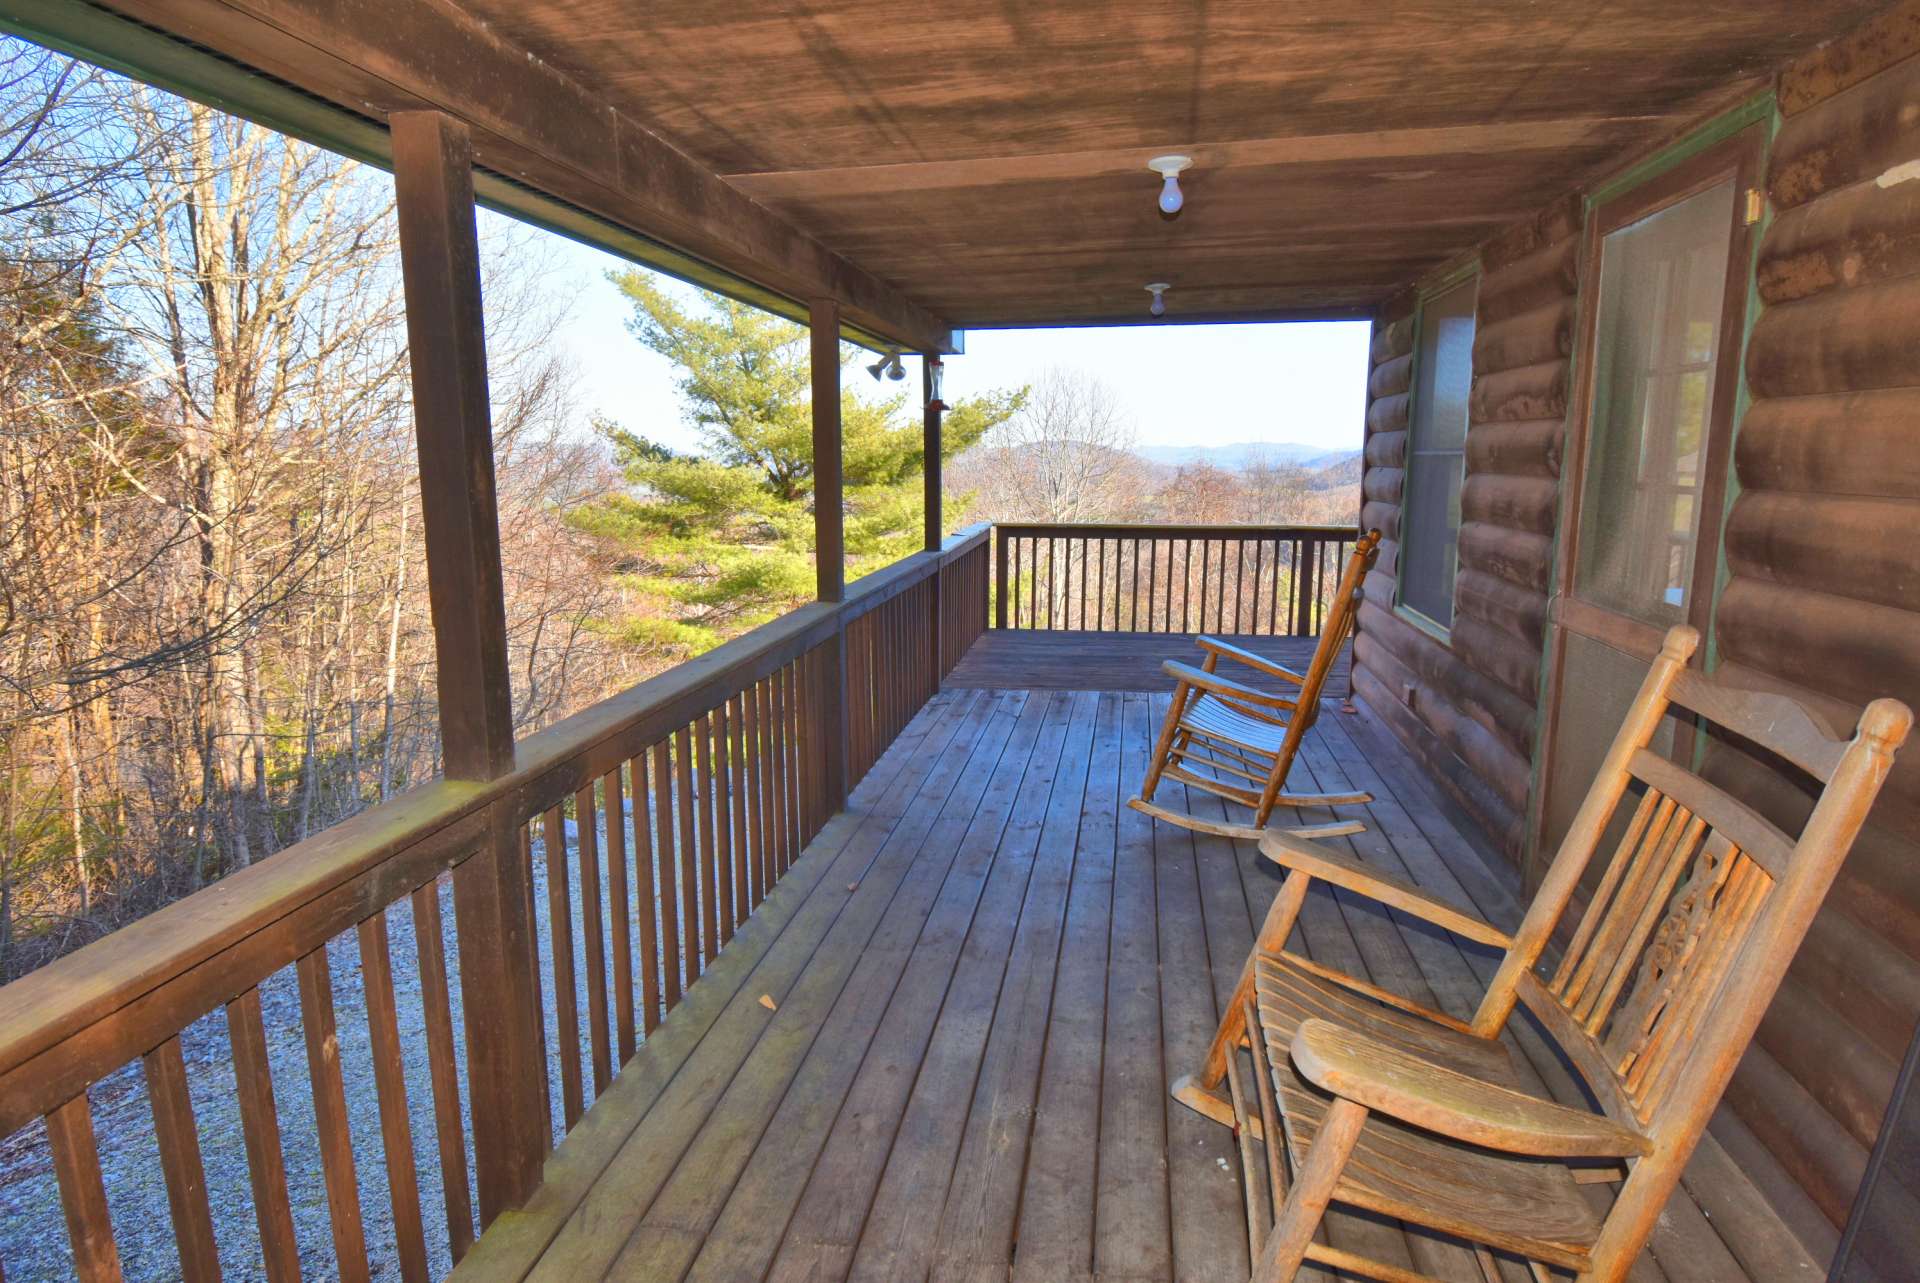 Relax on the covered front porch and enjoy the views and the sounds of Nature all around you.